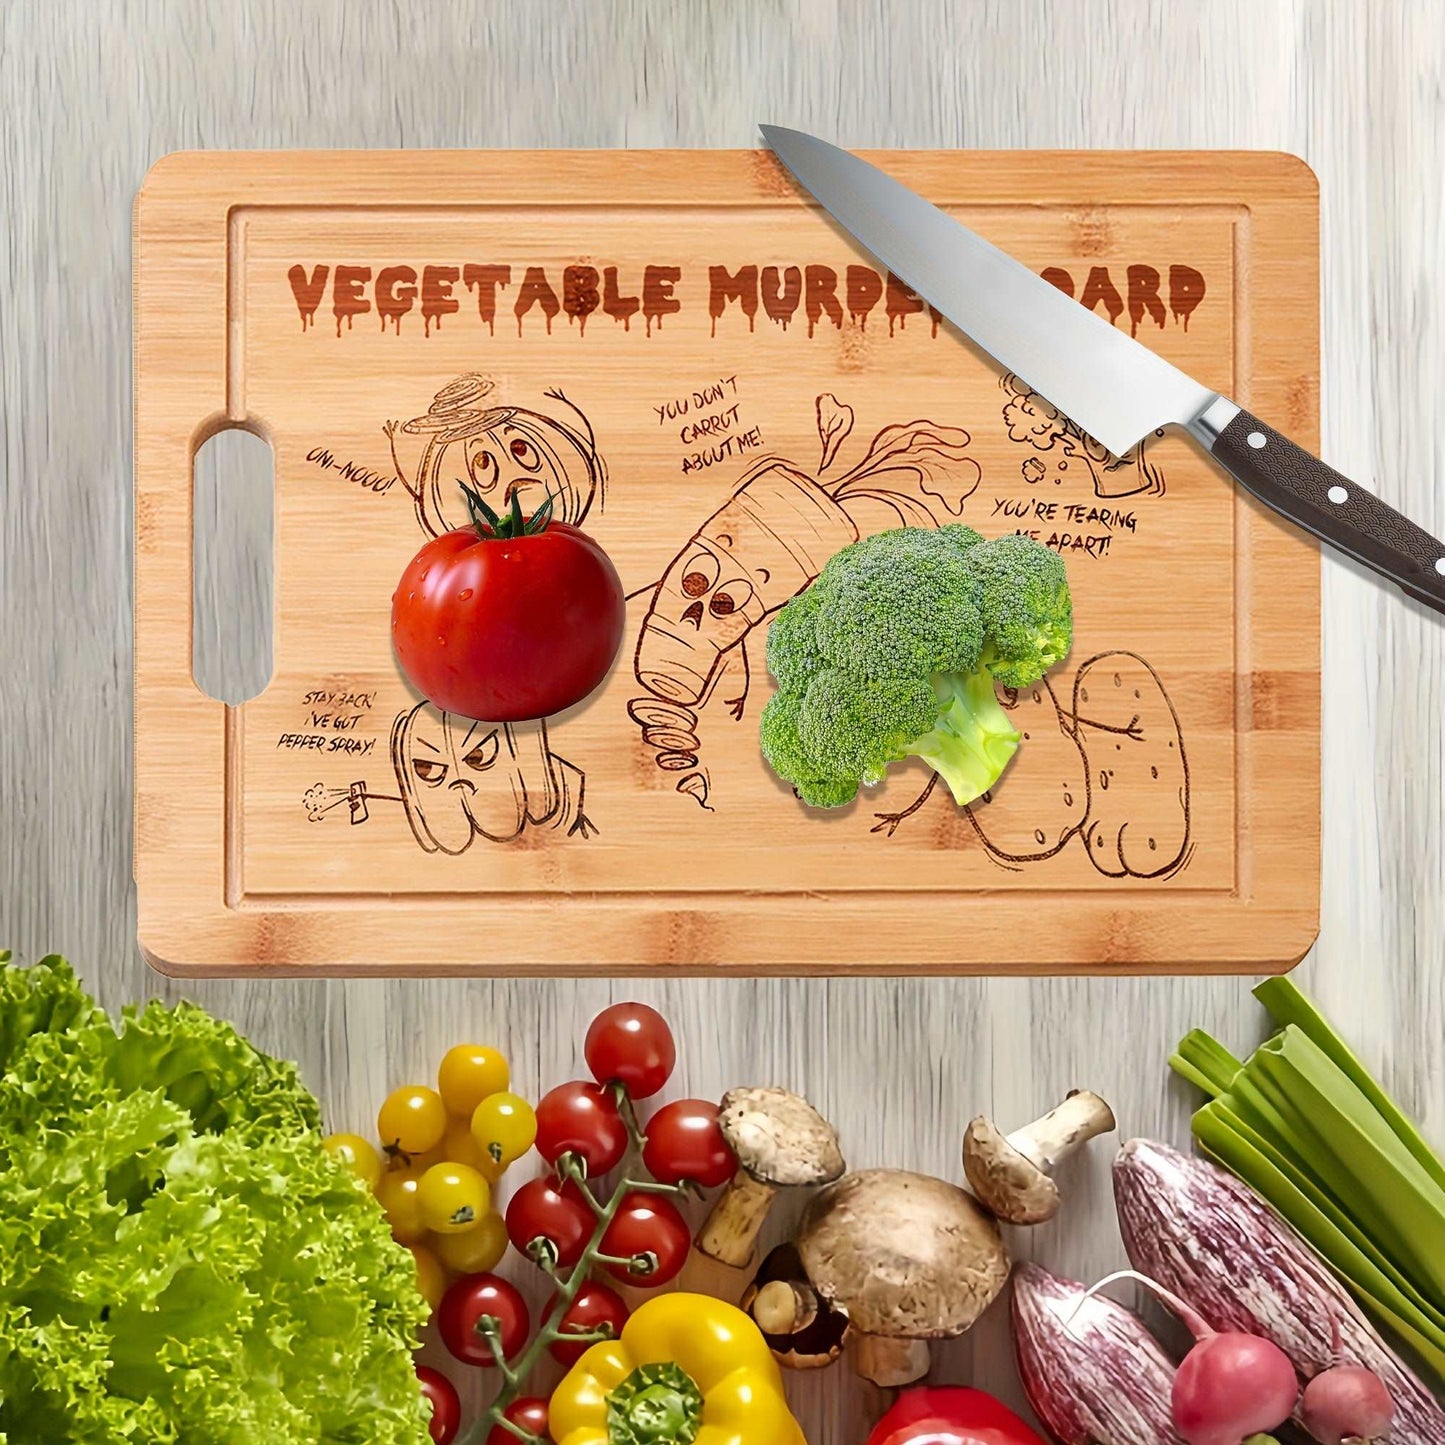 Bamboo Cutting Board Kitchen Accessory with Funny Engraving